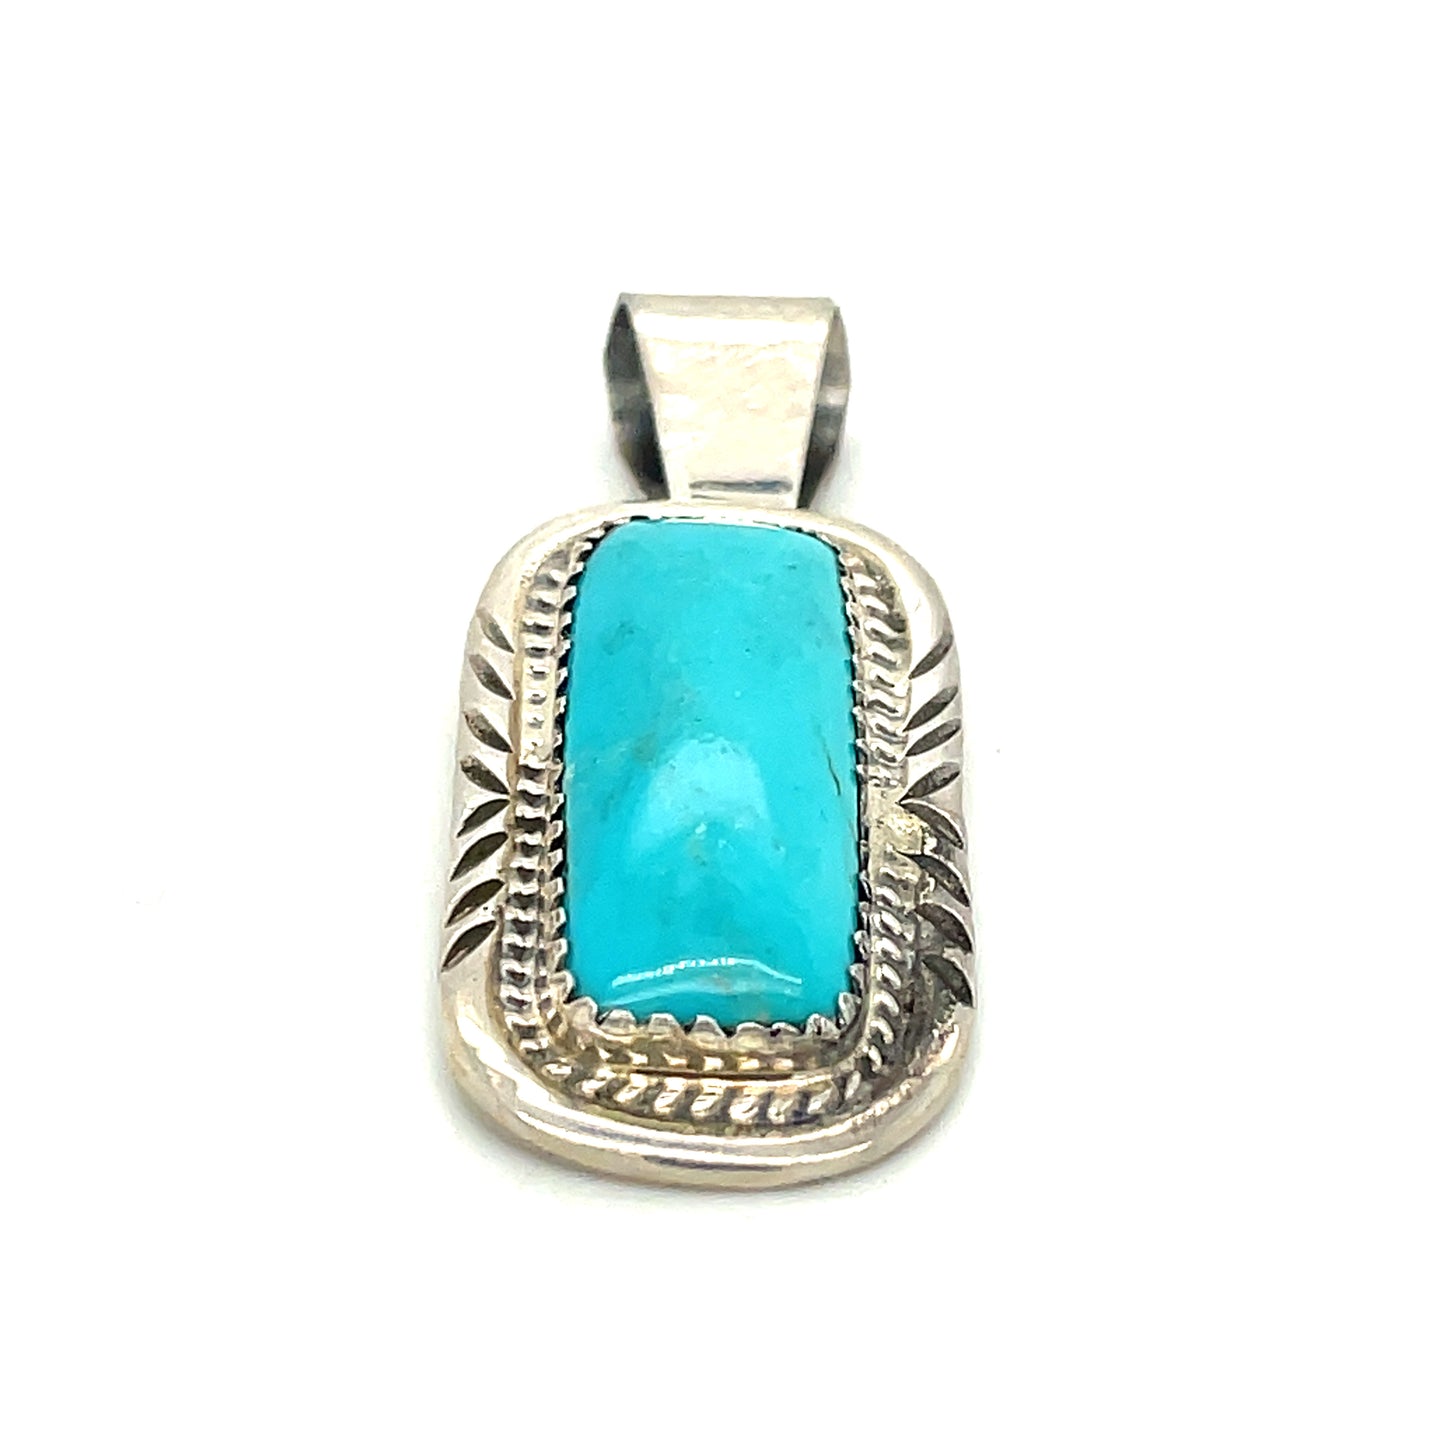 Vintage Sterling Silver and Turquoise Pendant New Old Stock